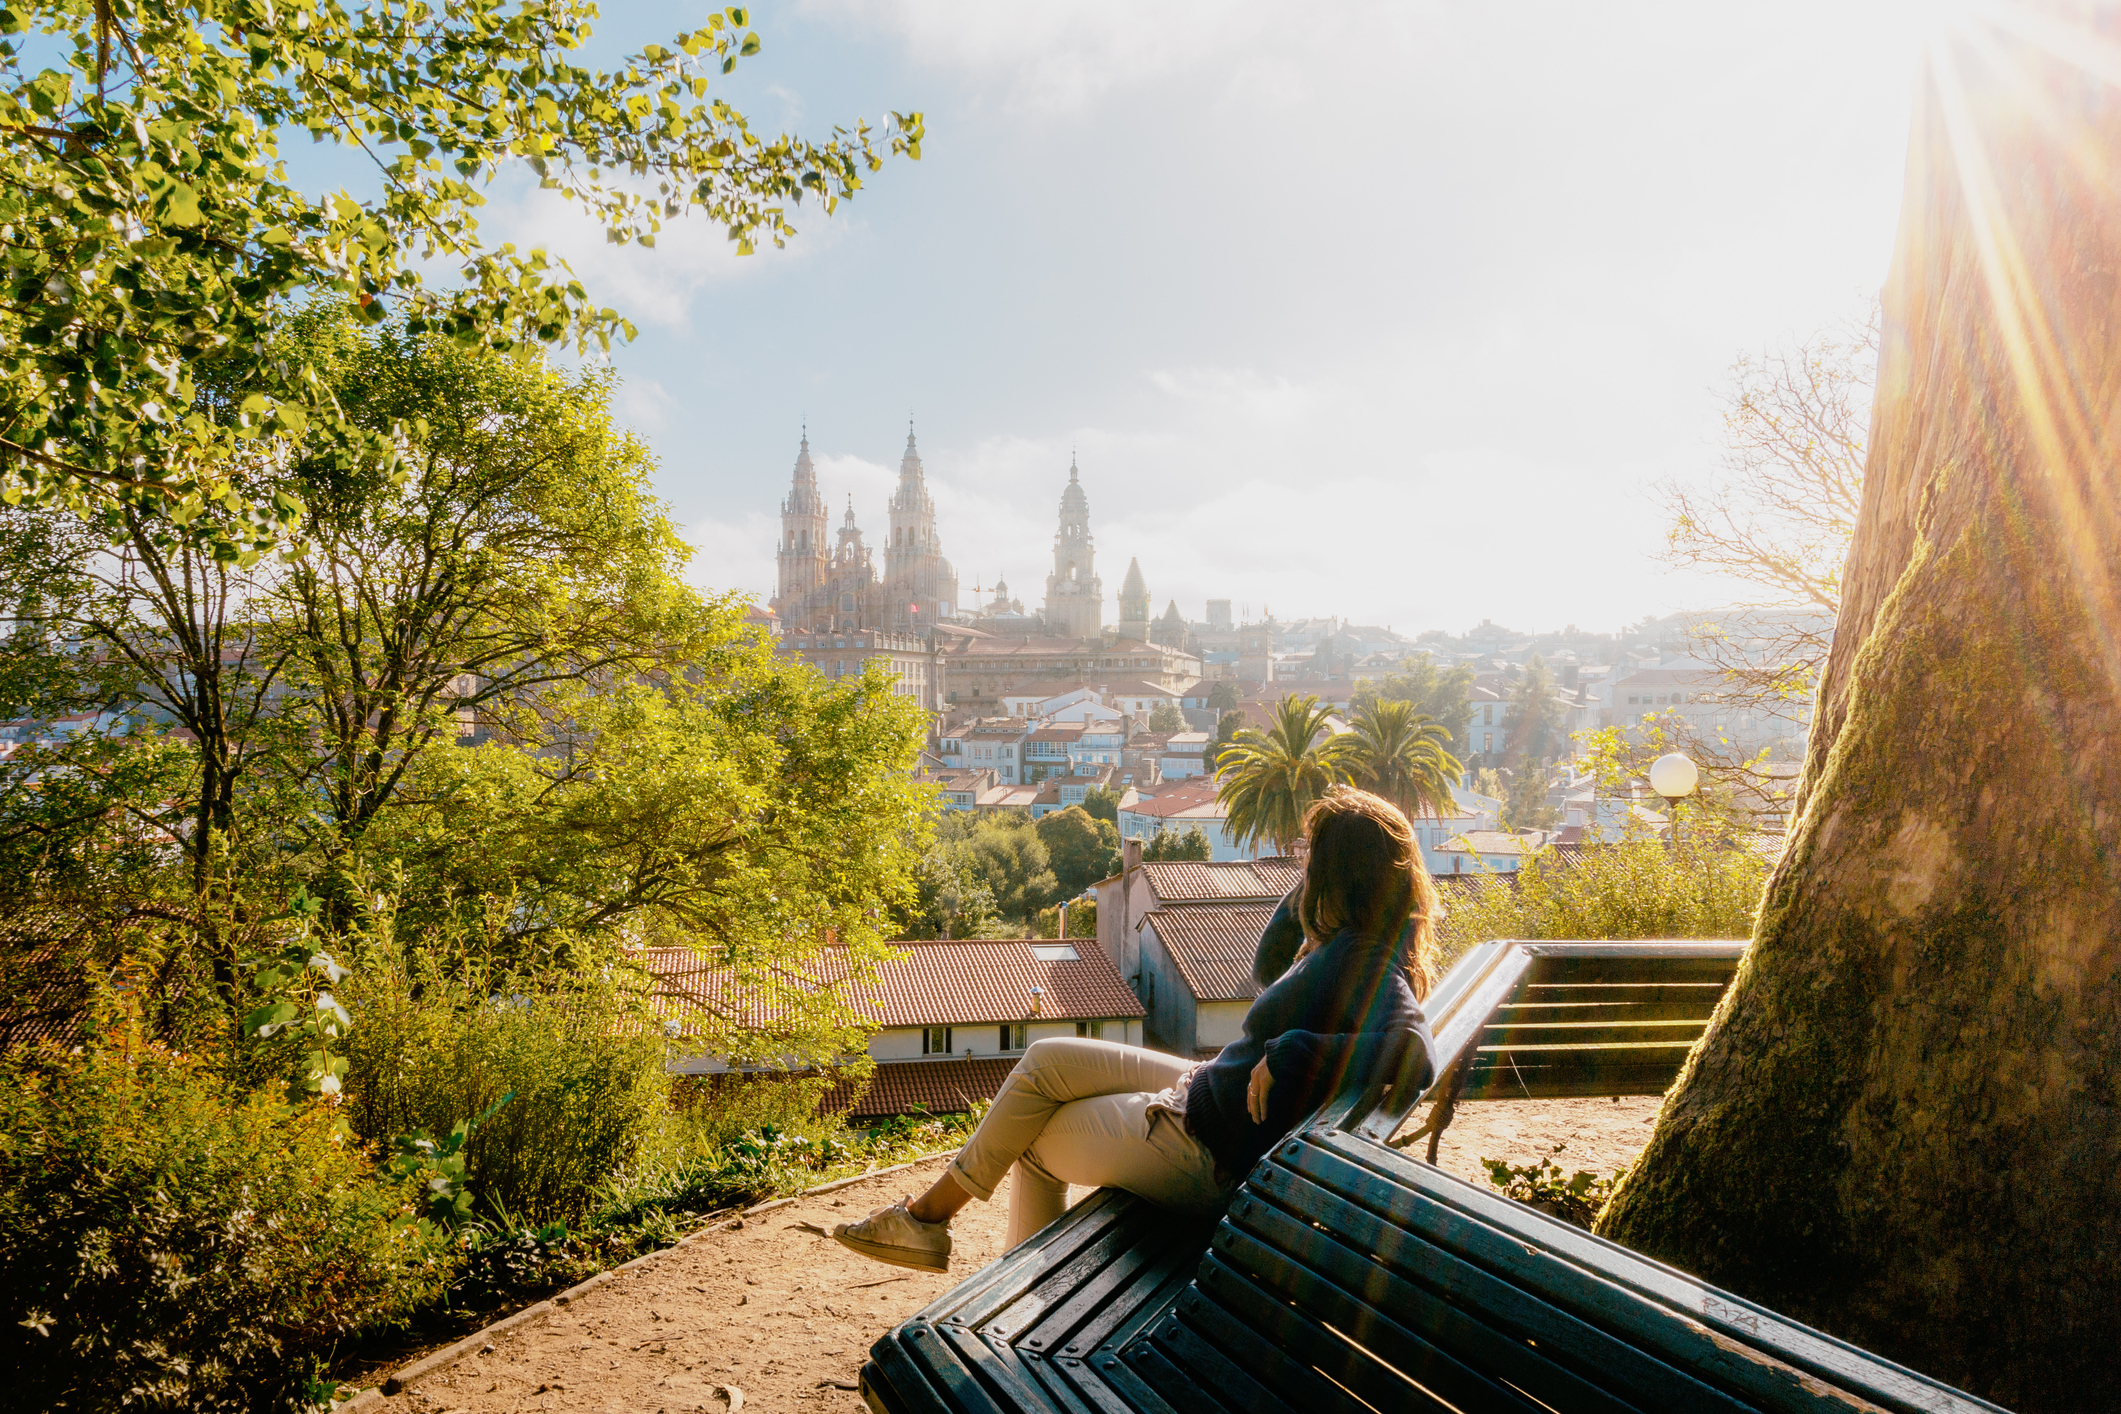 A woman sitting on a bench overlooking a beautiful city